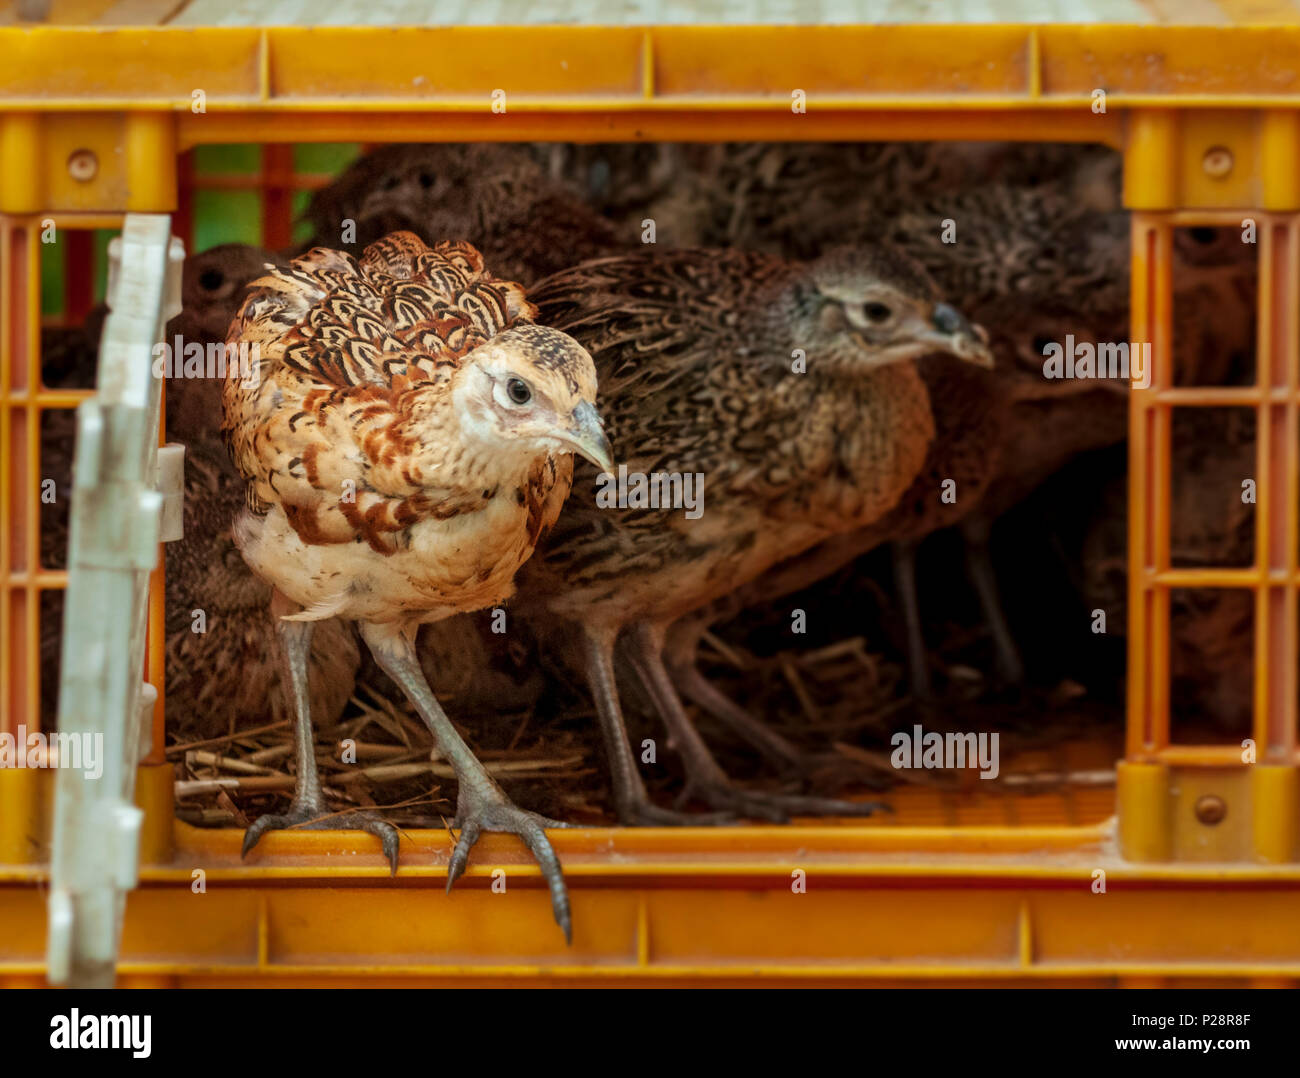 Seven week old pheasant chicks, often known as pheasant poults, being released into a gamekeepers release pen from the crates used to transport them Stock Photo